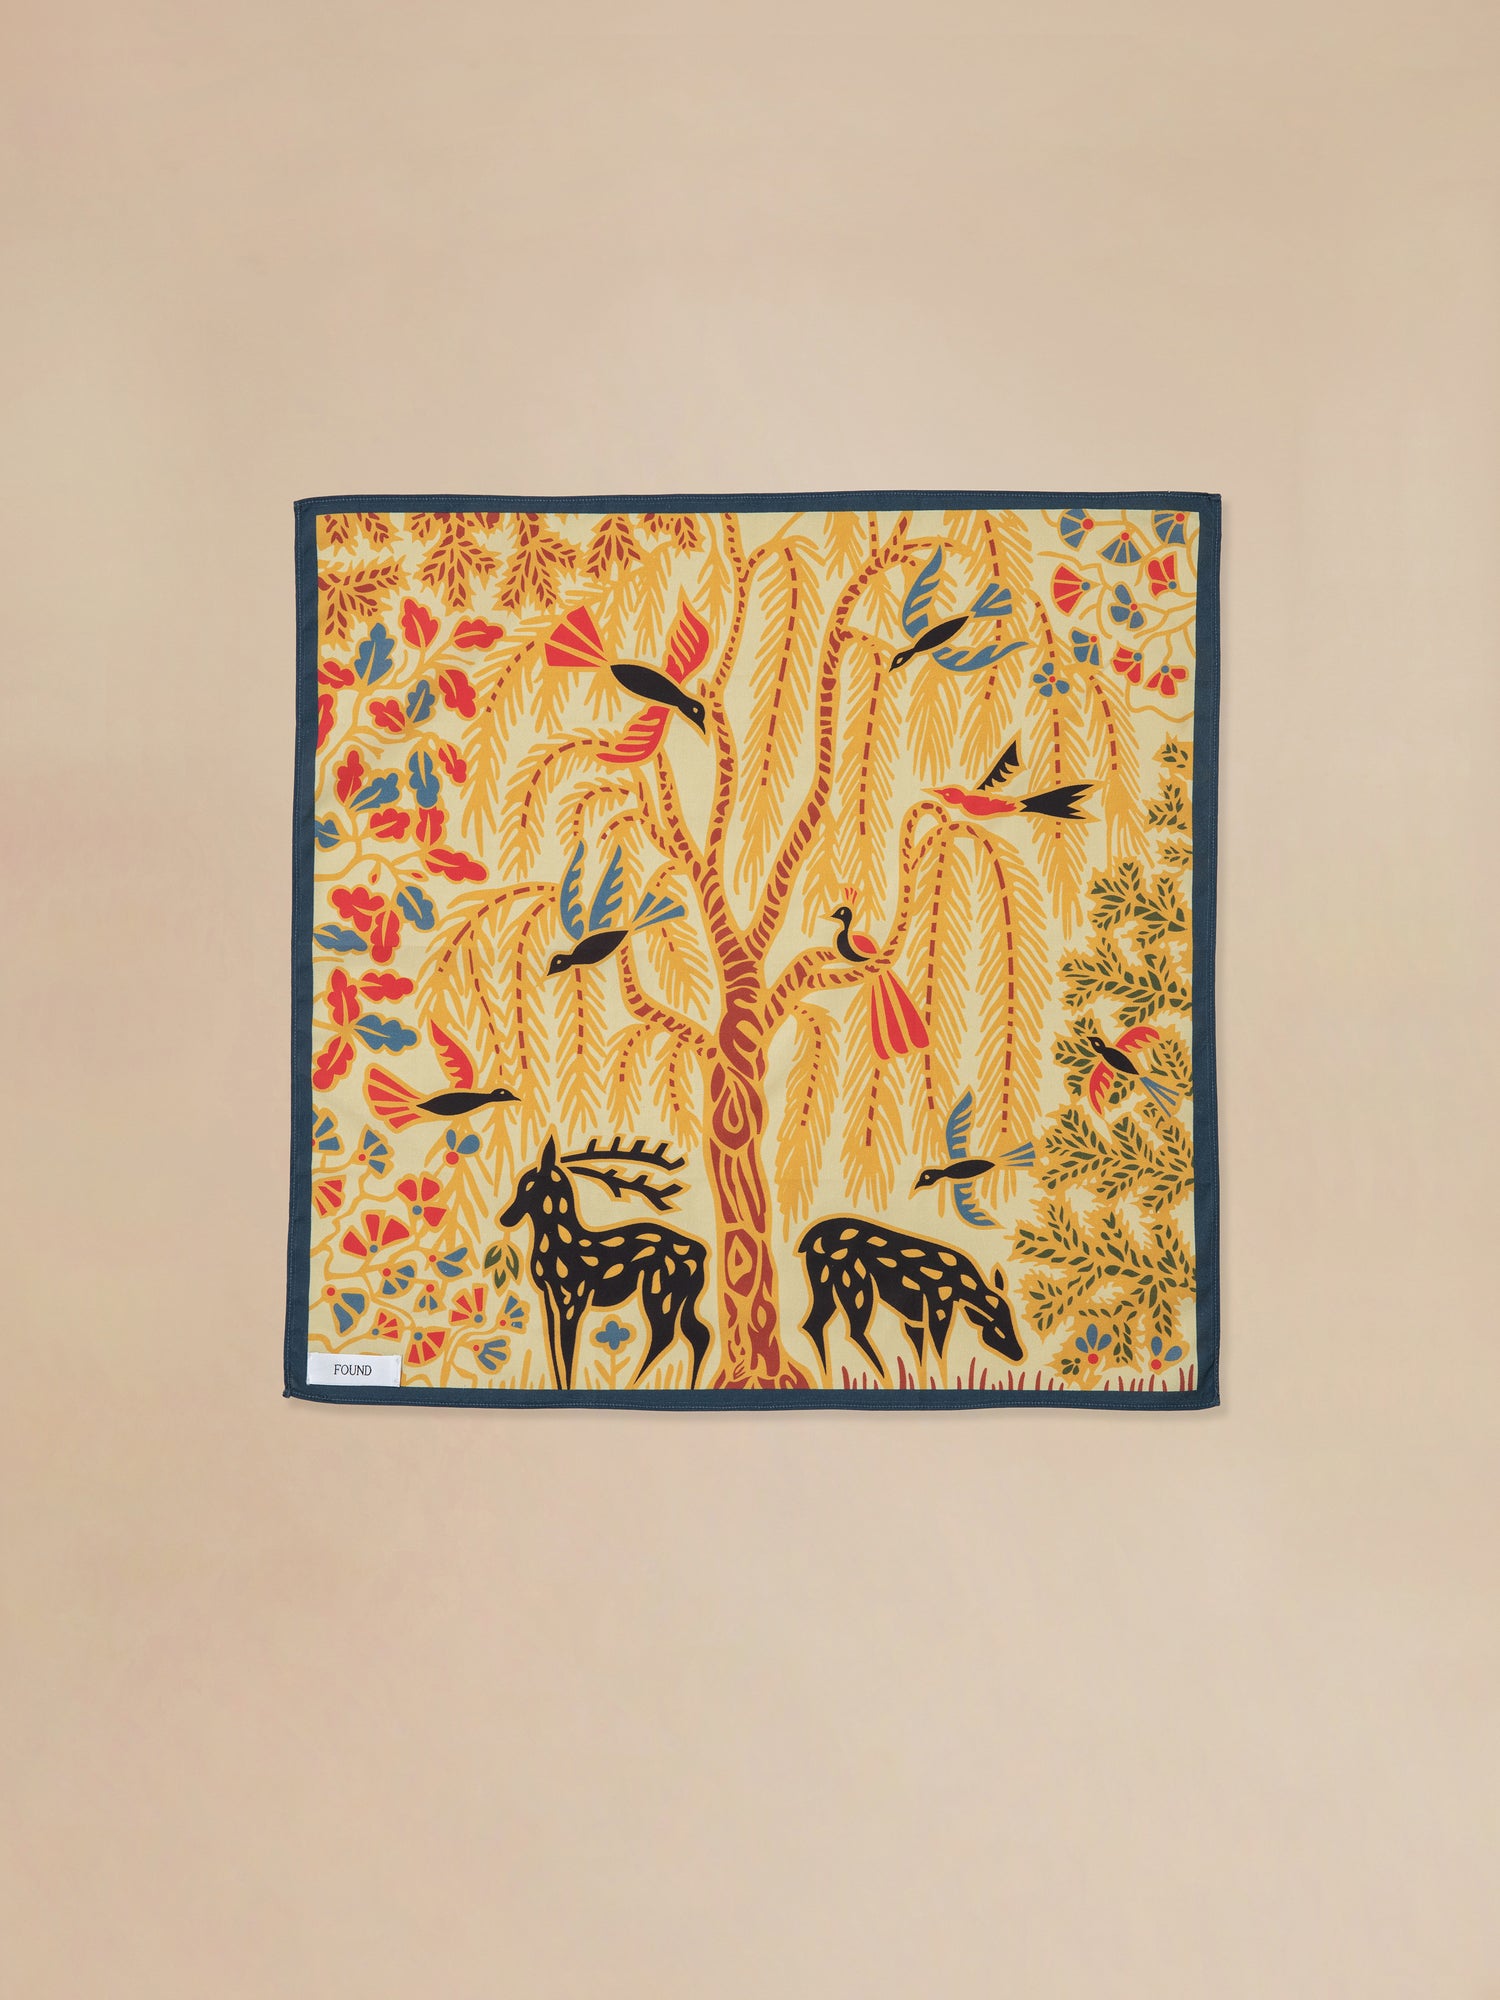 A pre-order Rainforest Bandana with a painting of a deer and a tree featuring Phulkari artwork by Found.